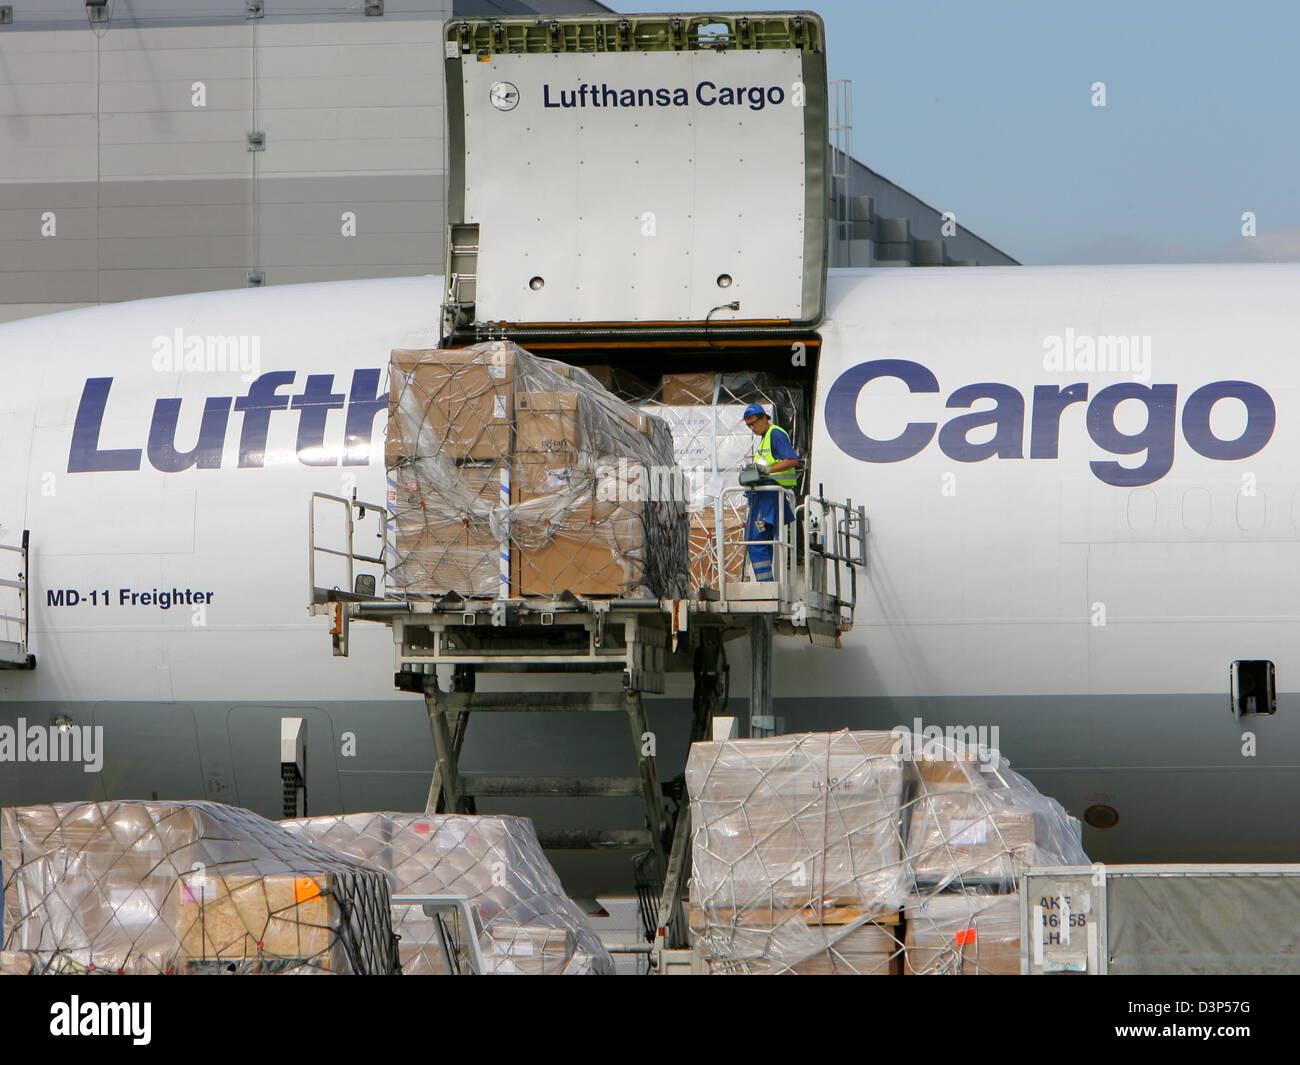 A Lufthansa Cargo MD-11 freighter plane is unloaded at the cargo area of the airport in Frankfurt Main, Germany, Tuesday, 5 September 2006. Lufthansa Cargo AG is a 100% daughter of Lufthansa and runs 19 MD-11F freighter planes. Lufthansa serves more than 500 destinations worldwide. Photo: Arne Dedert Stock Photo